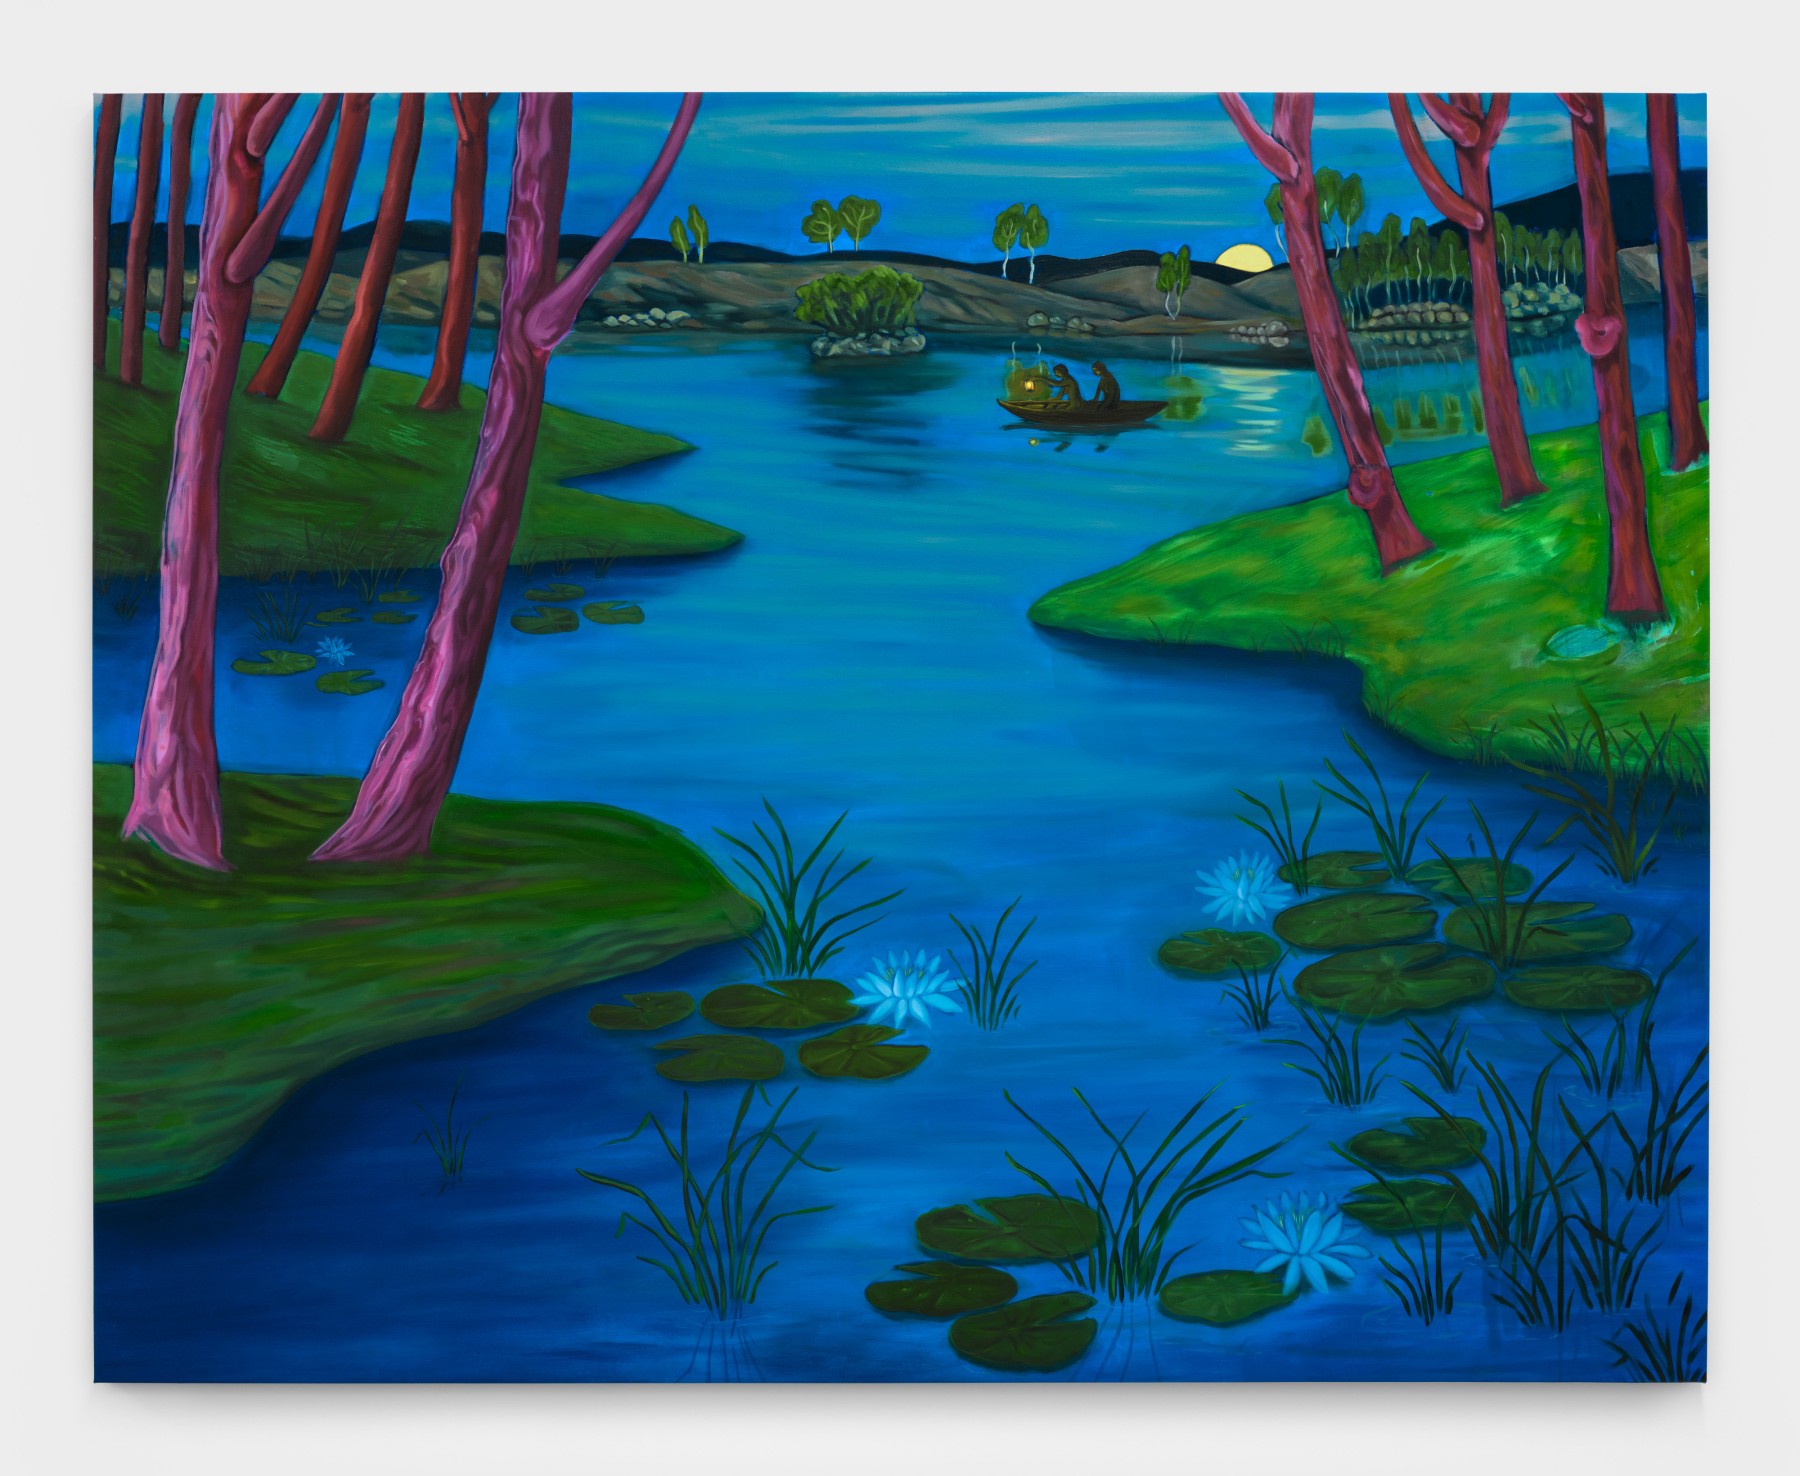 Bambou Gili's artwork "Full Moon". On a serene body of water surrounded by water lillies two figures travel by boat in moonlight. 64 x 80 1/2 in (162.6 x 204.5 cm), oil on linen, 2022